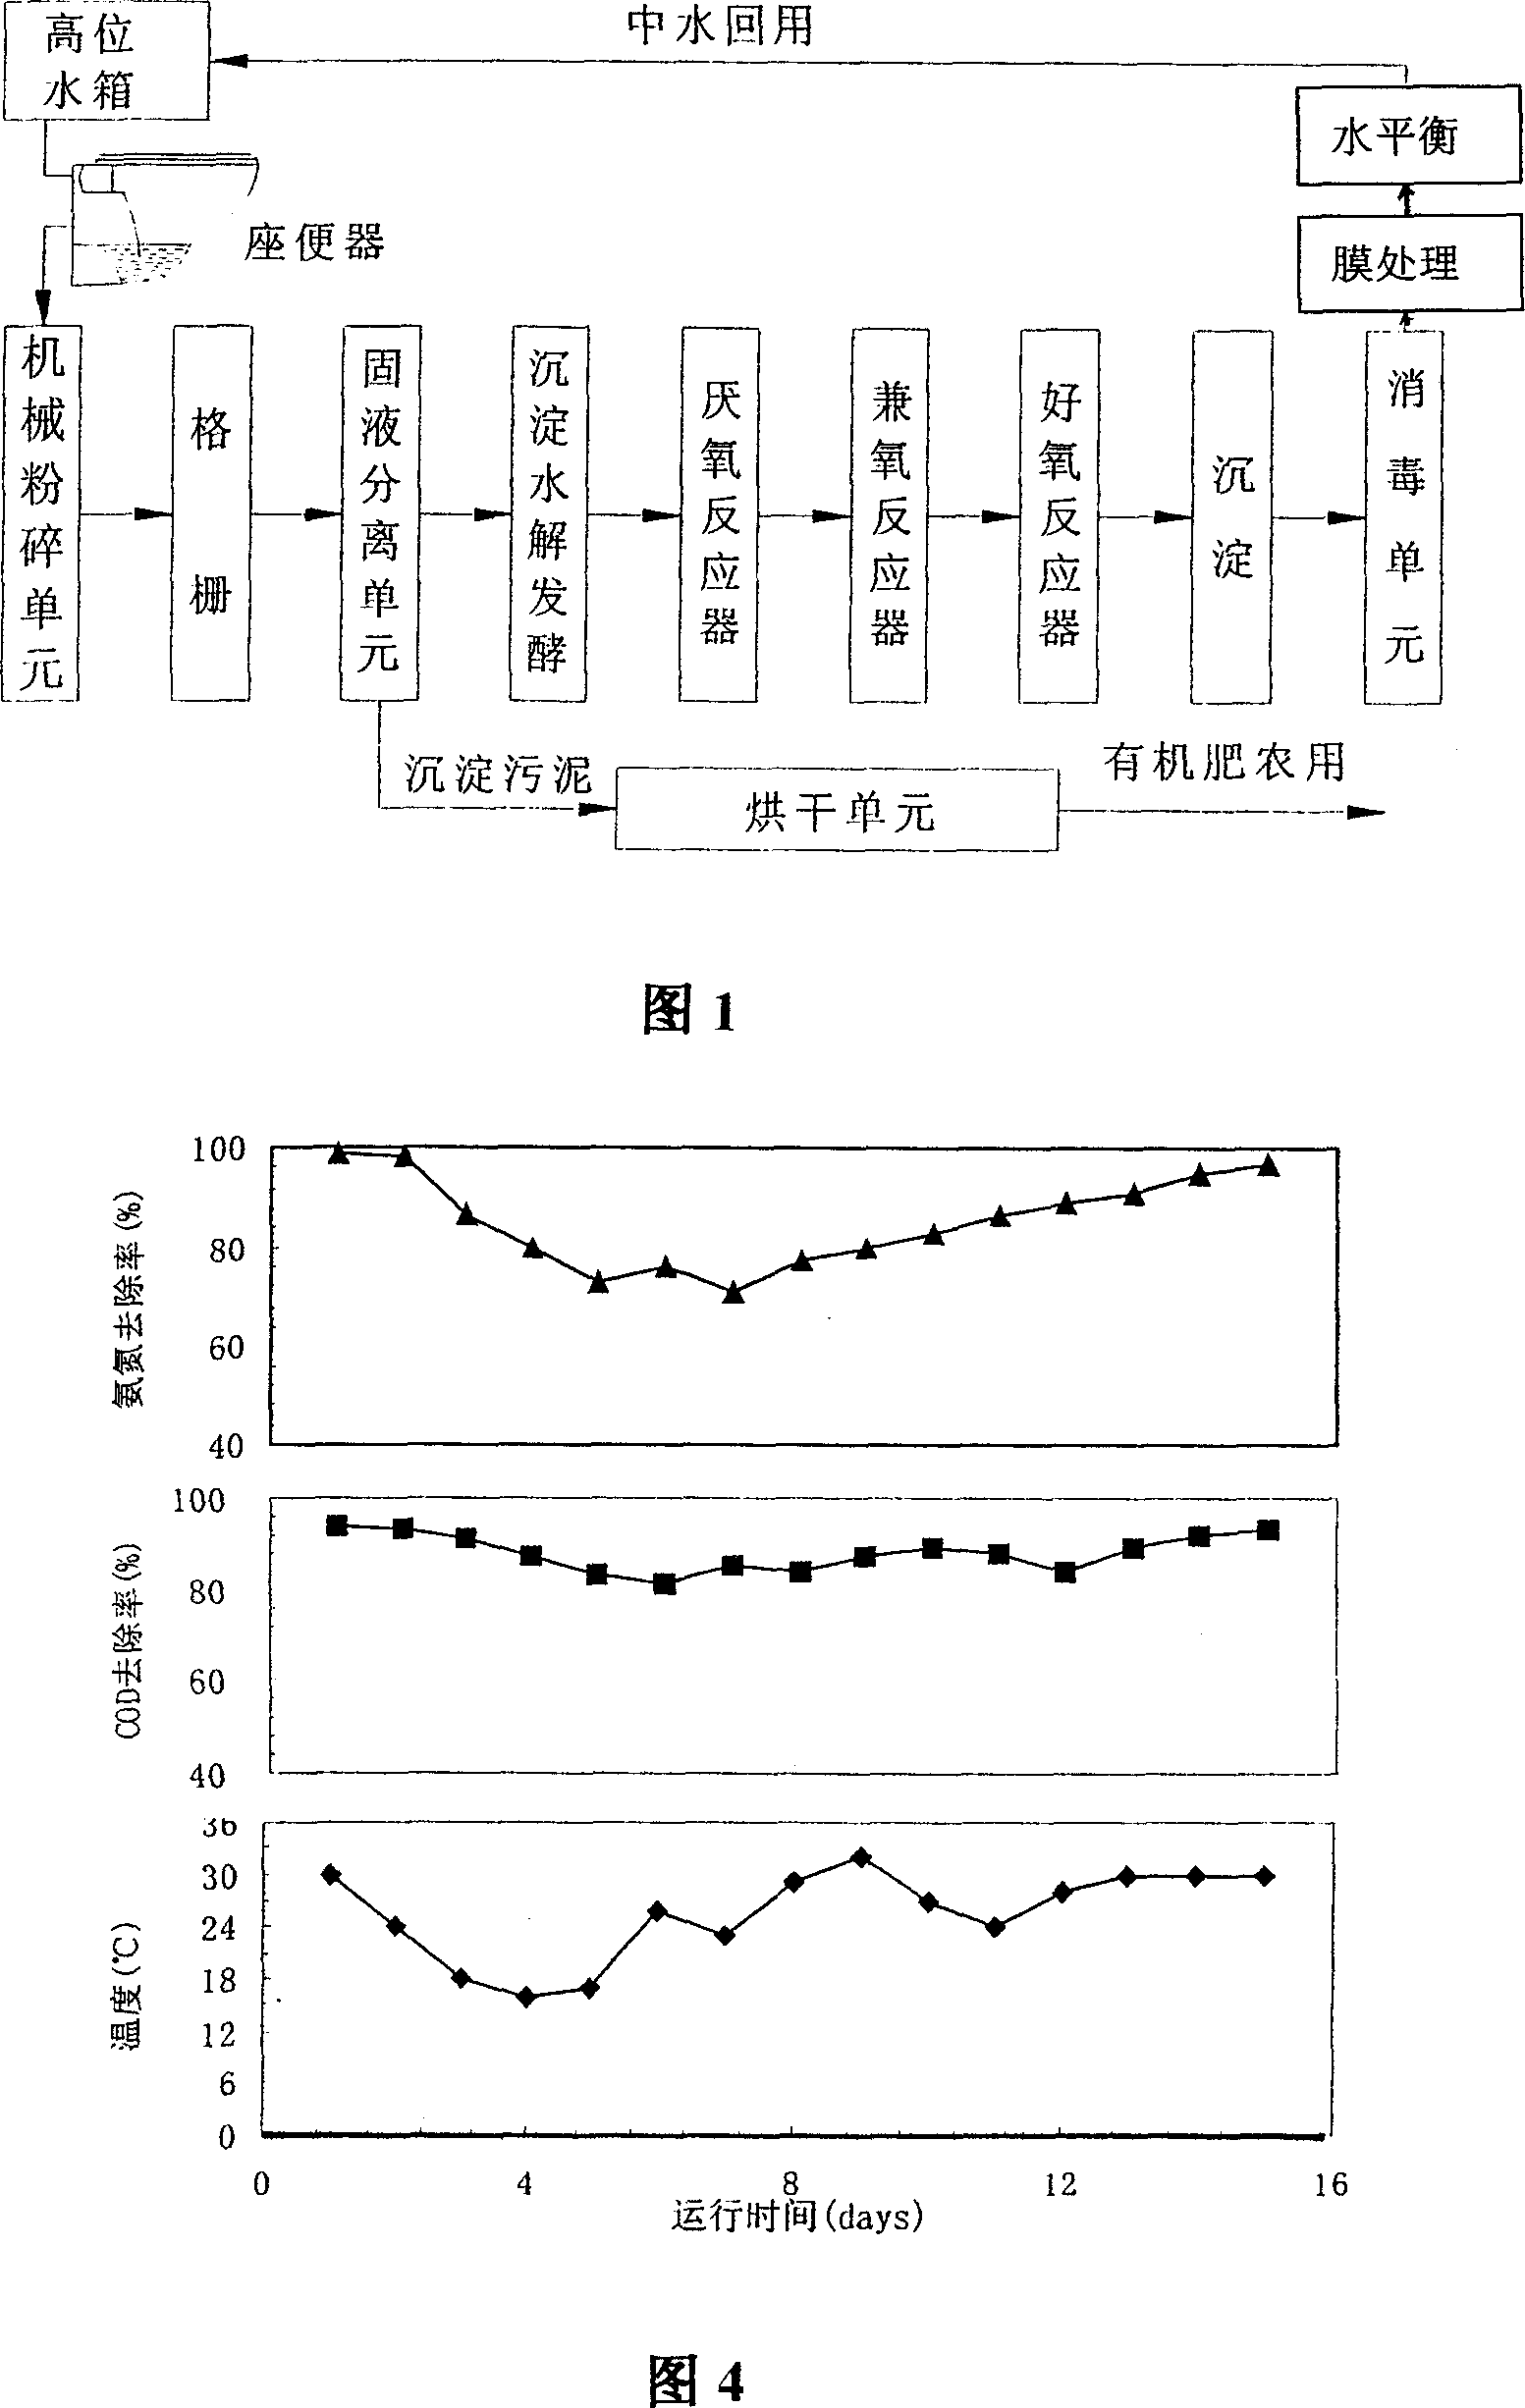 Biological treatment method and device for ecological system of sewage circulation utilization